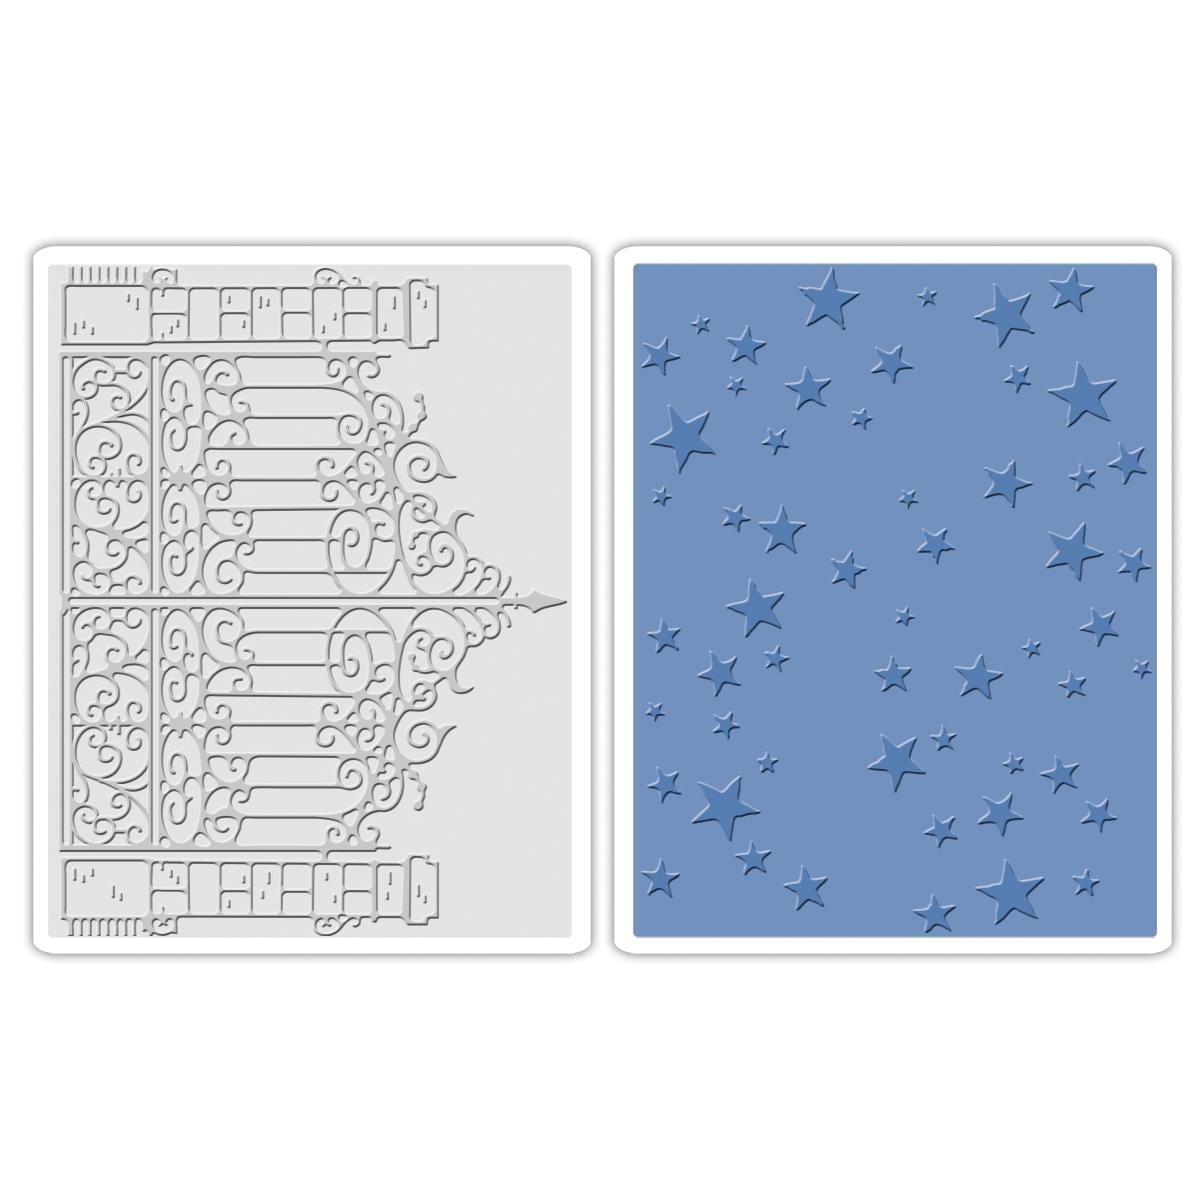 Sizzix Texture Fades A2 Embossing Folders 2/pkg   Iron Gate   Starry Night By Tim Holtz